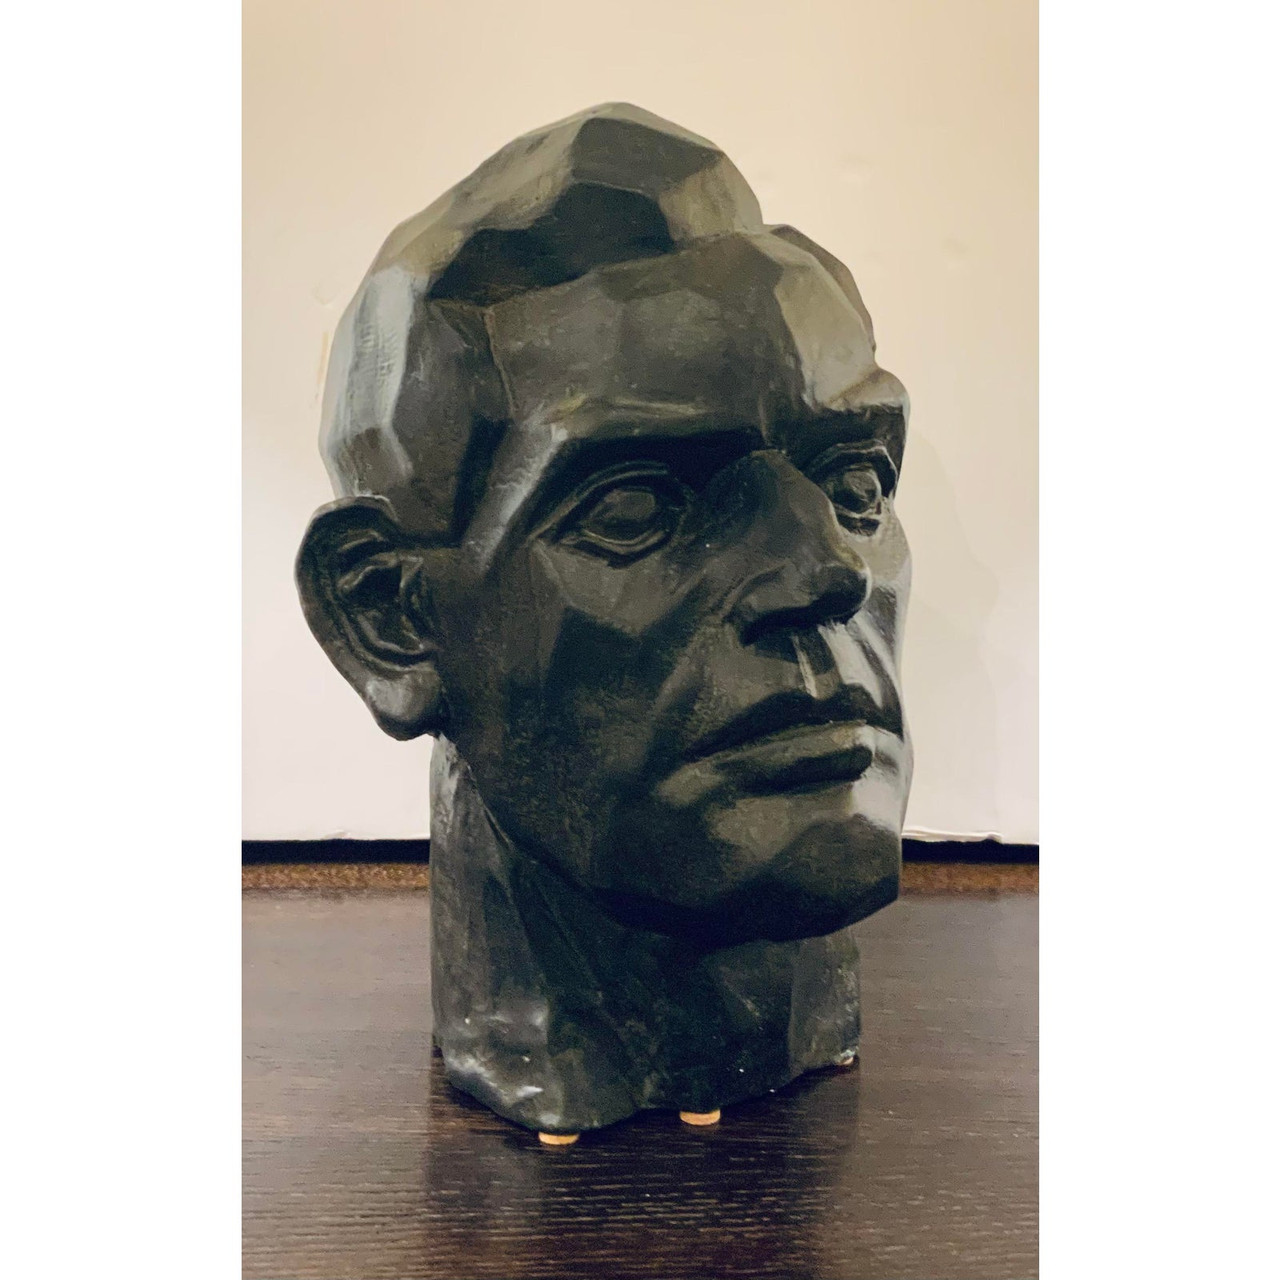 https://cdn11.bigcommerce.com/s-a3fc1/images/stencil/1280x1280/products/6570/33286/mid-century-modern-style-bronze-finished-bust-sculpture-of-a-man-6490__24012.1631308141.jpg?c=2